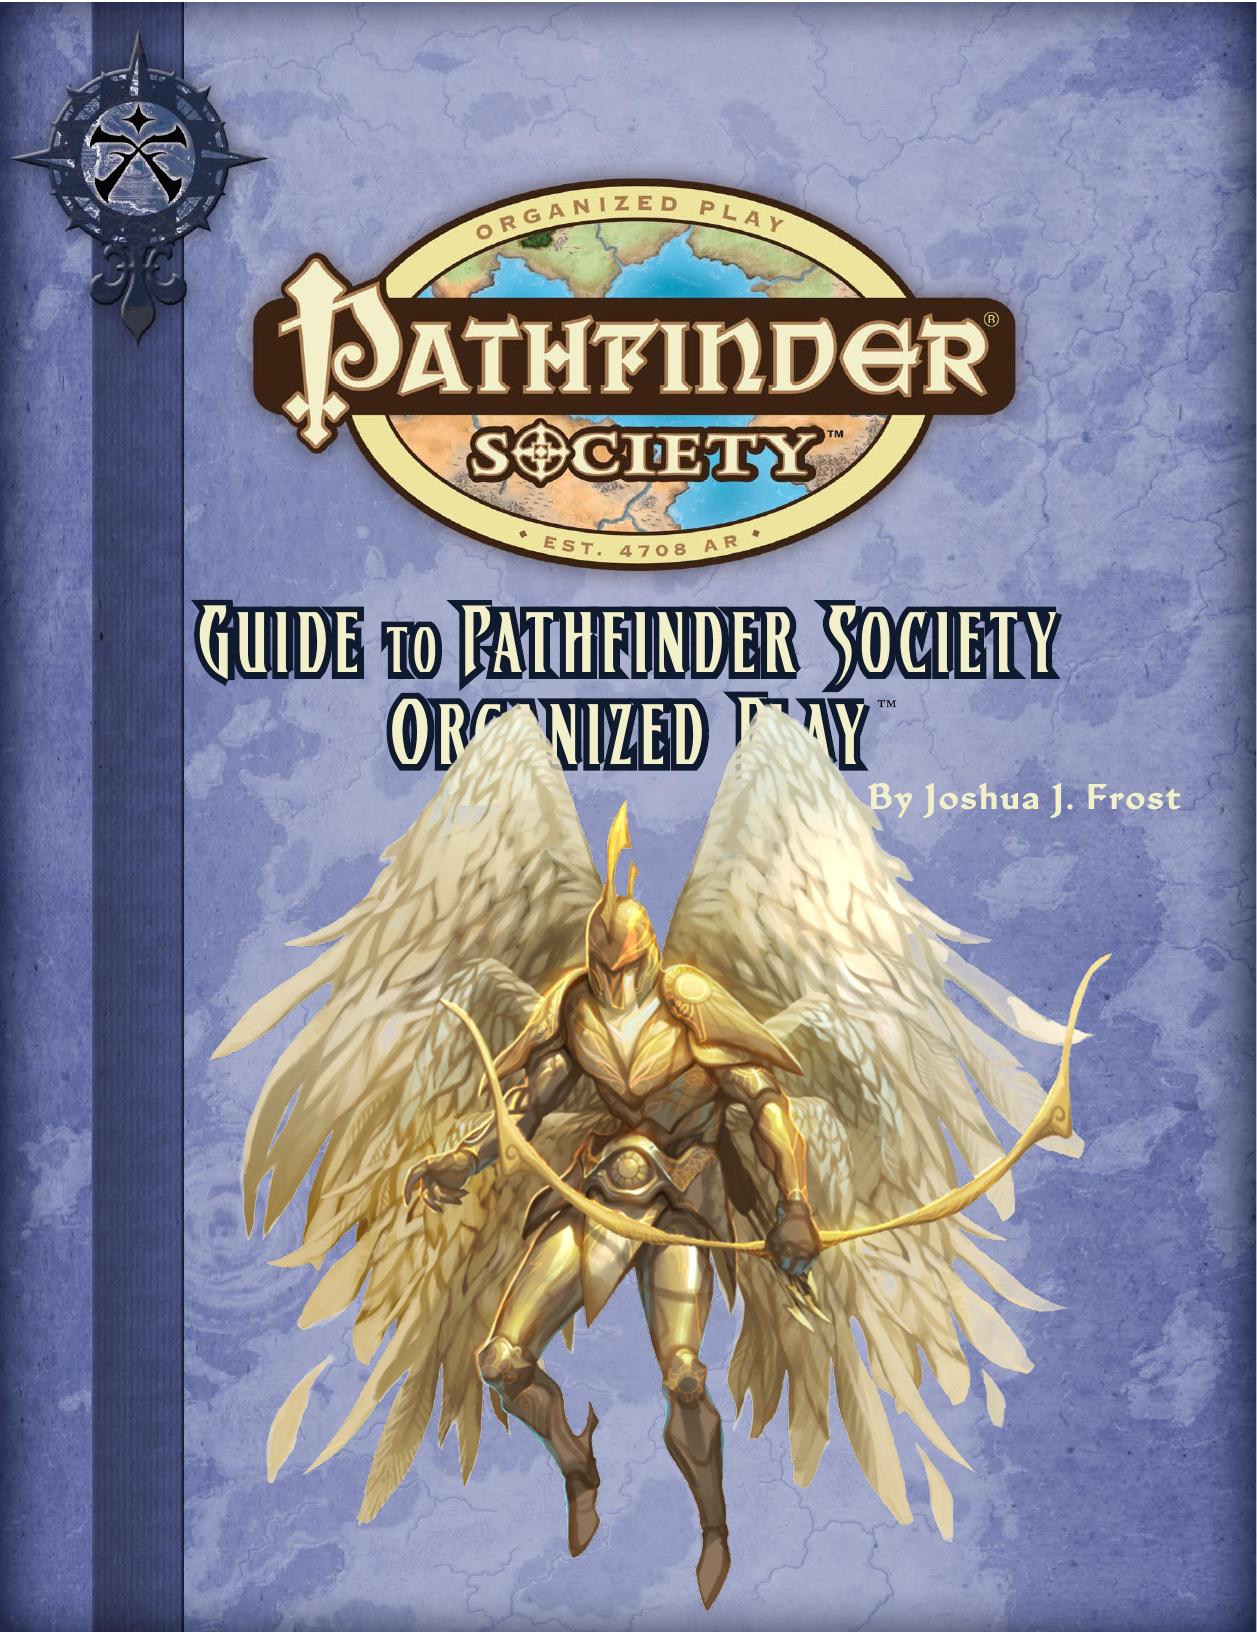 Guide to the Pathfinder Society